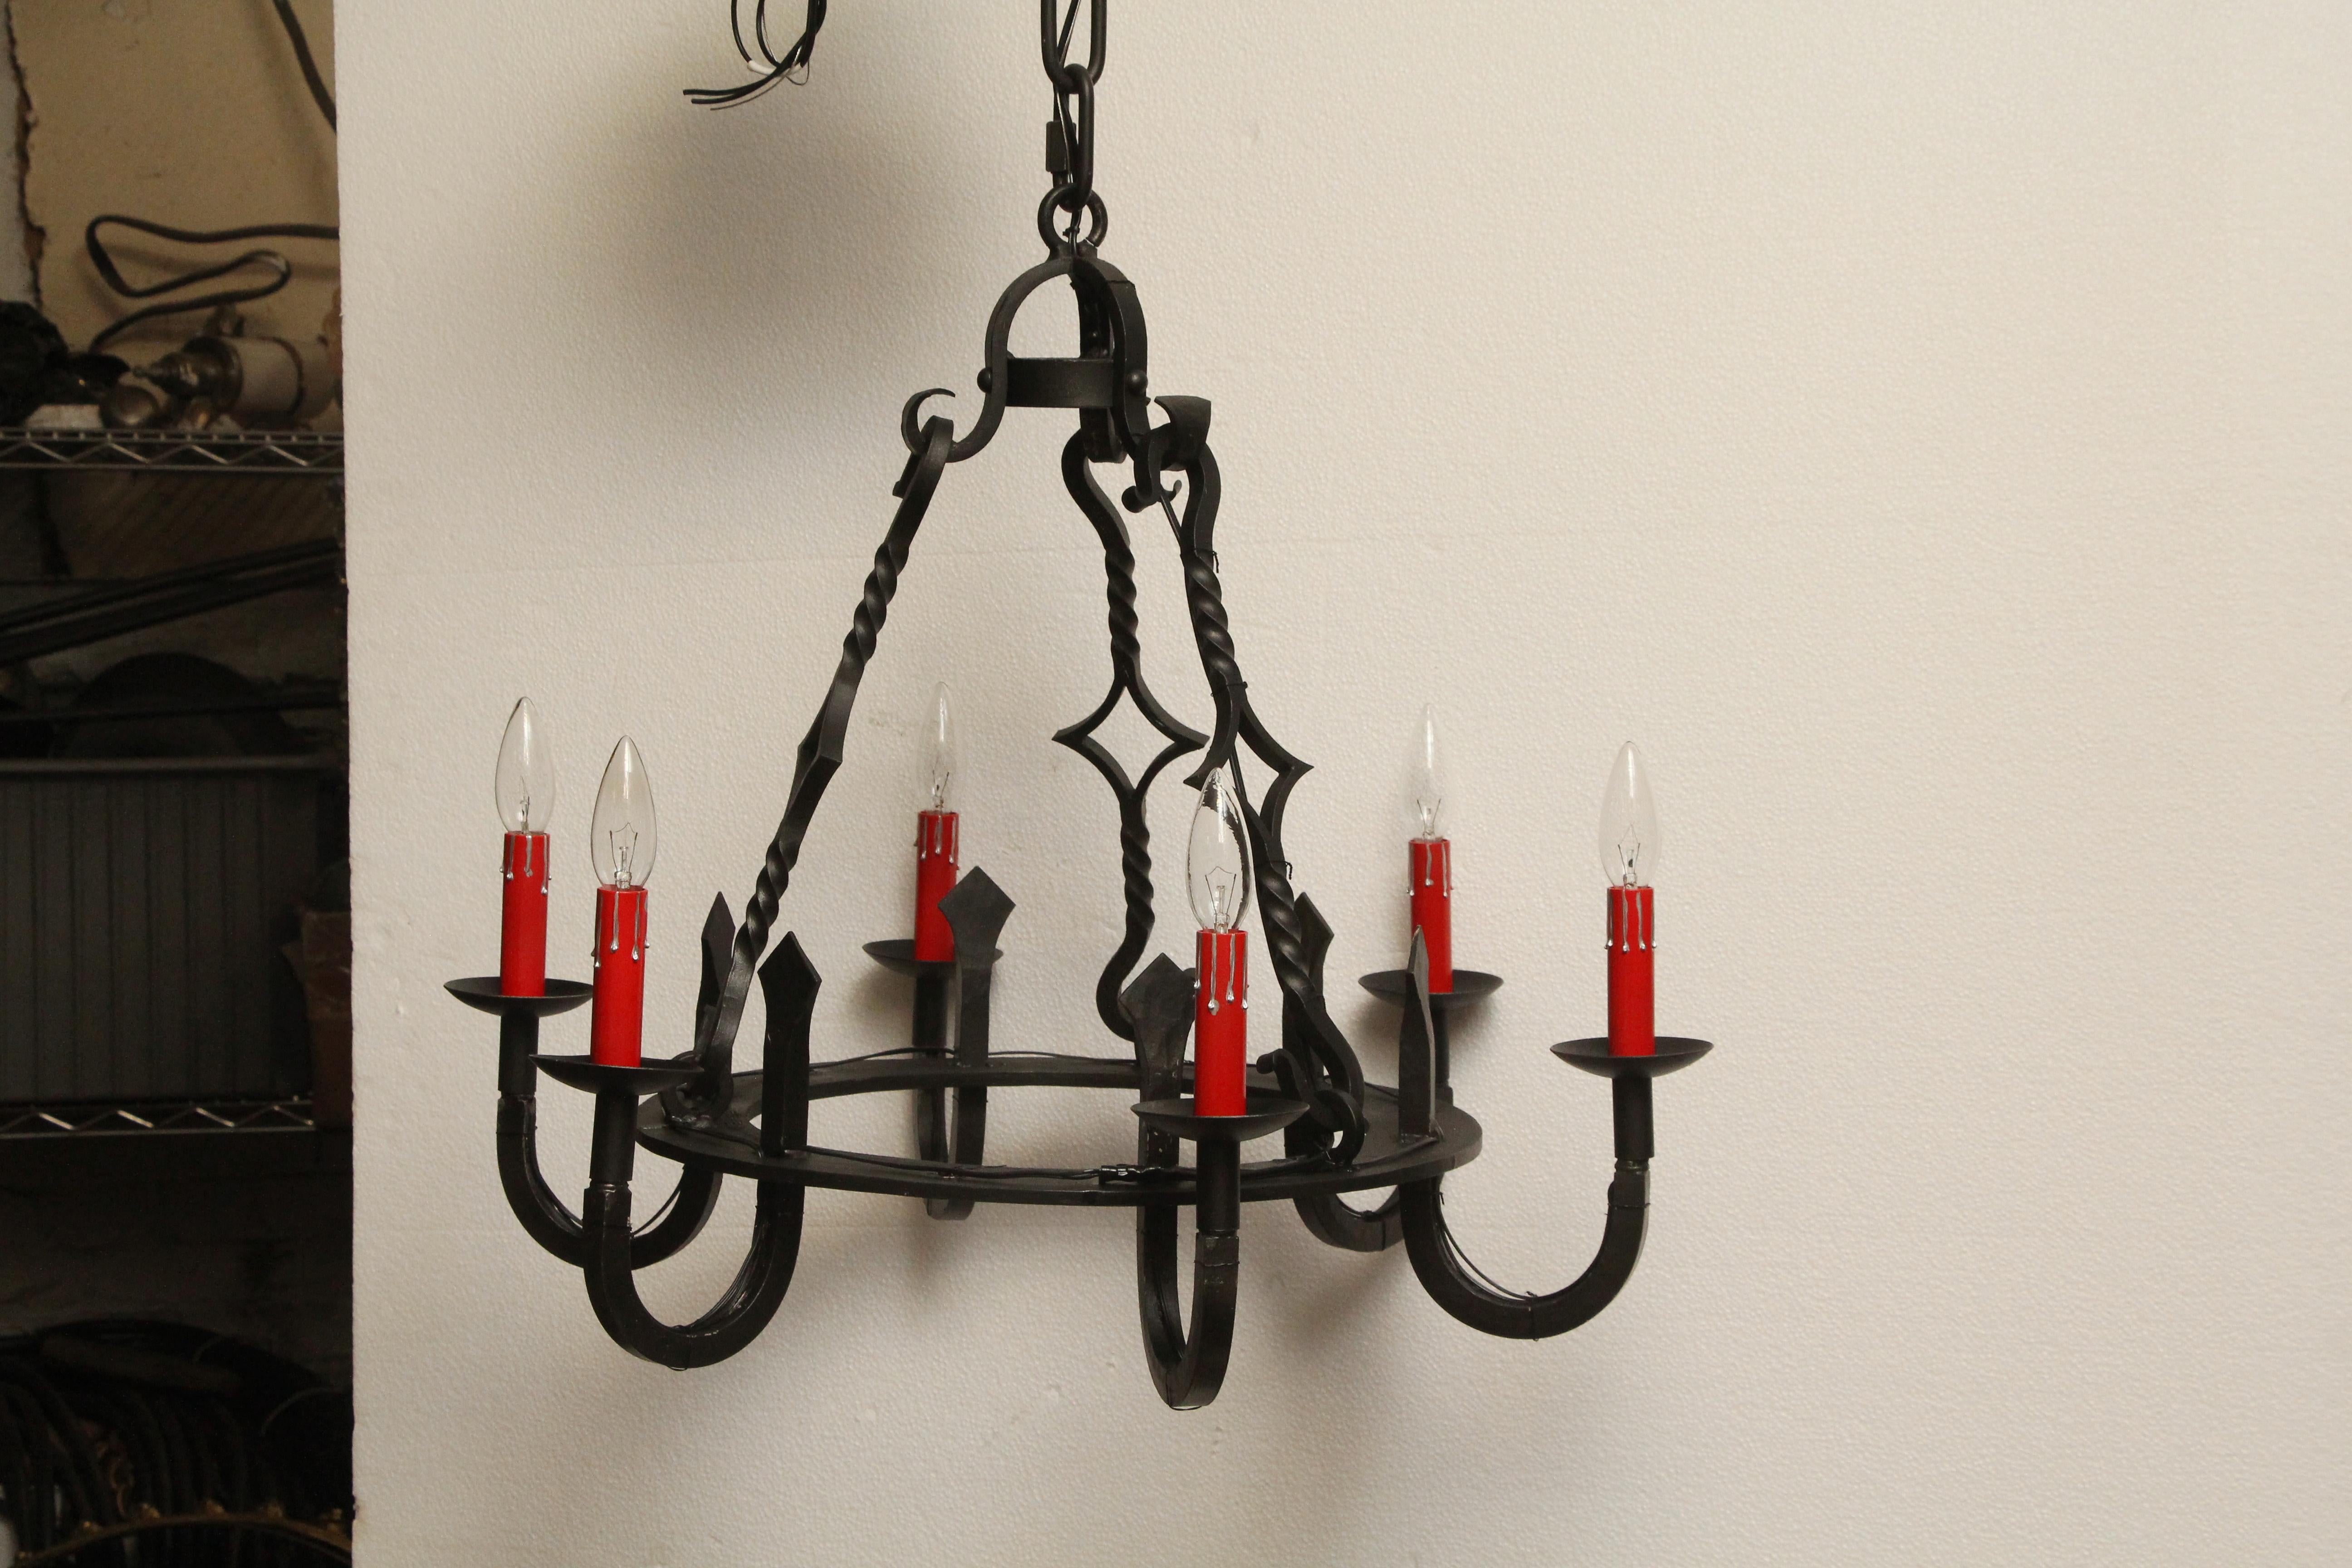 1970s wrought iron Gothic style black chandelier with six red candlestick arms. Cleaned and rewired. Please note, this item is located in our Los Angeles, CA location.